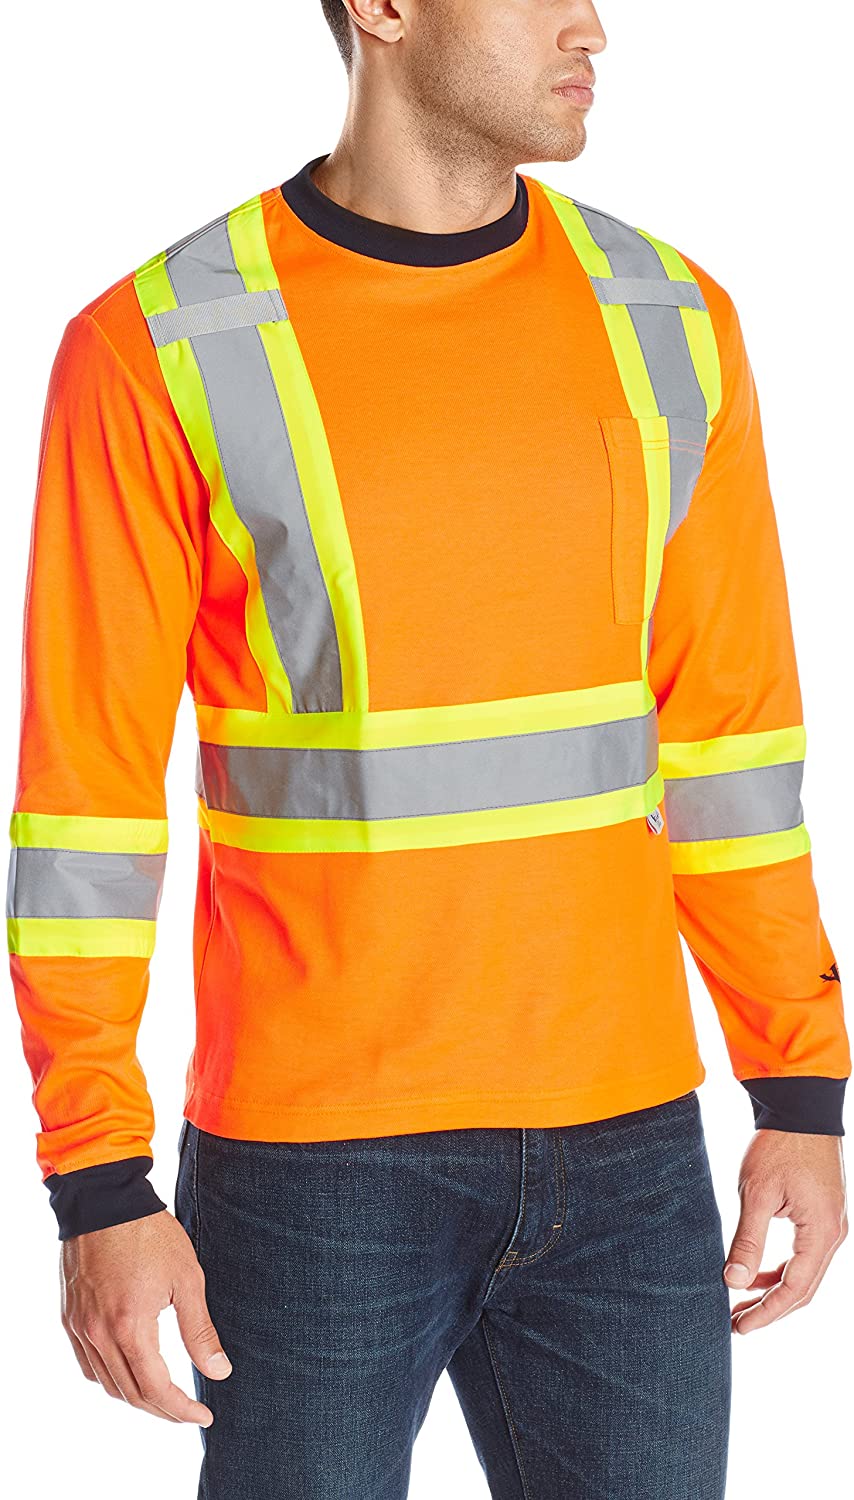 Men's Viking Hi-Vis Class 2 Safety Cotton Lined Long Sleeve Shirt in Orange from the front